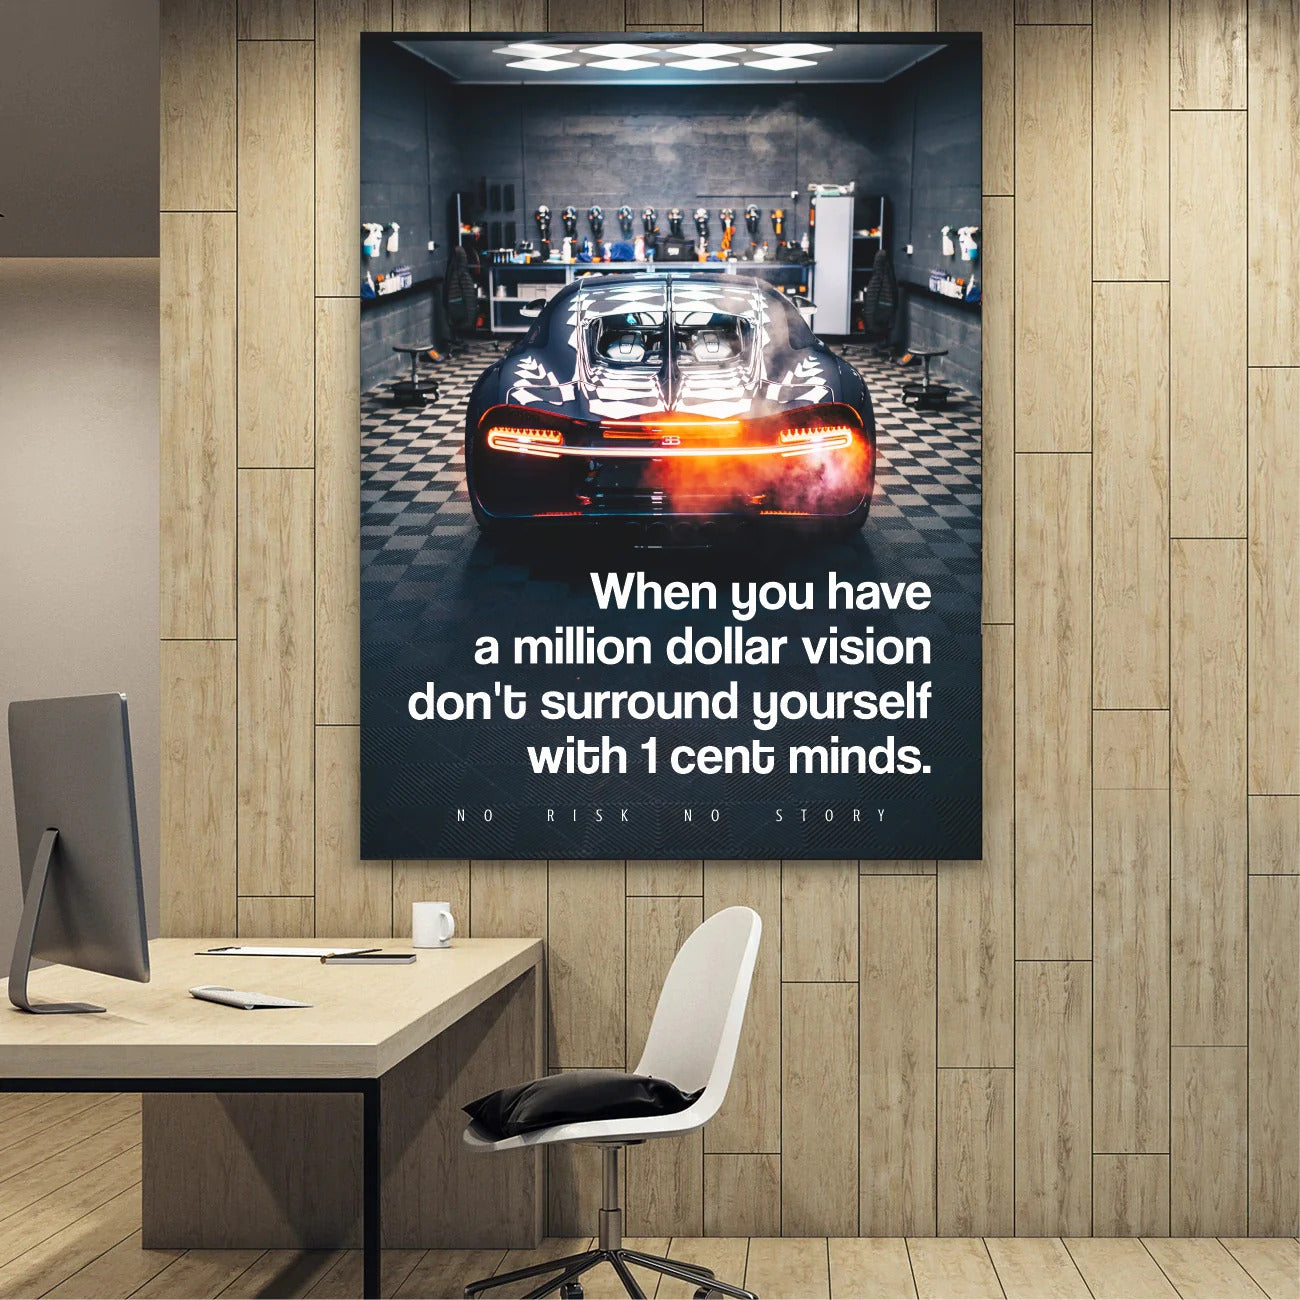 Why Investing in Inspirational Wall Art is a Smart Business Move